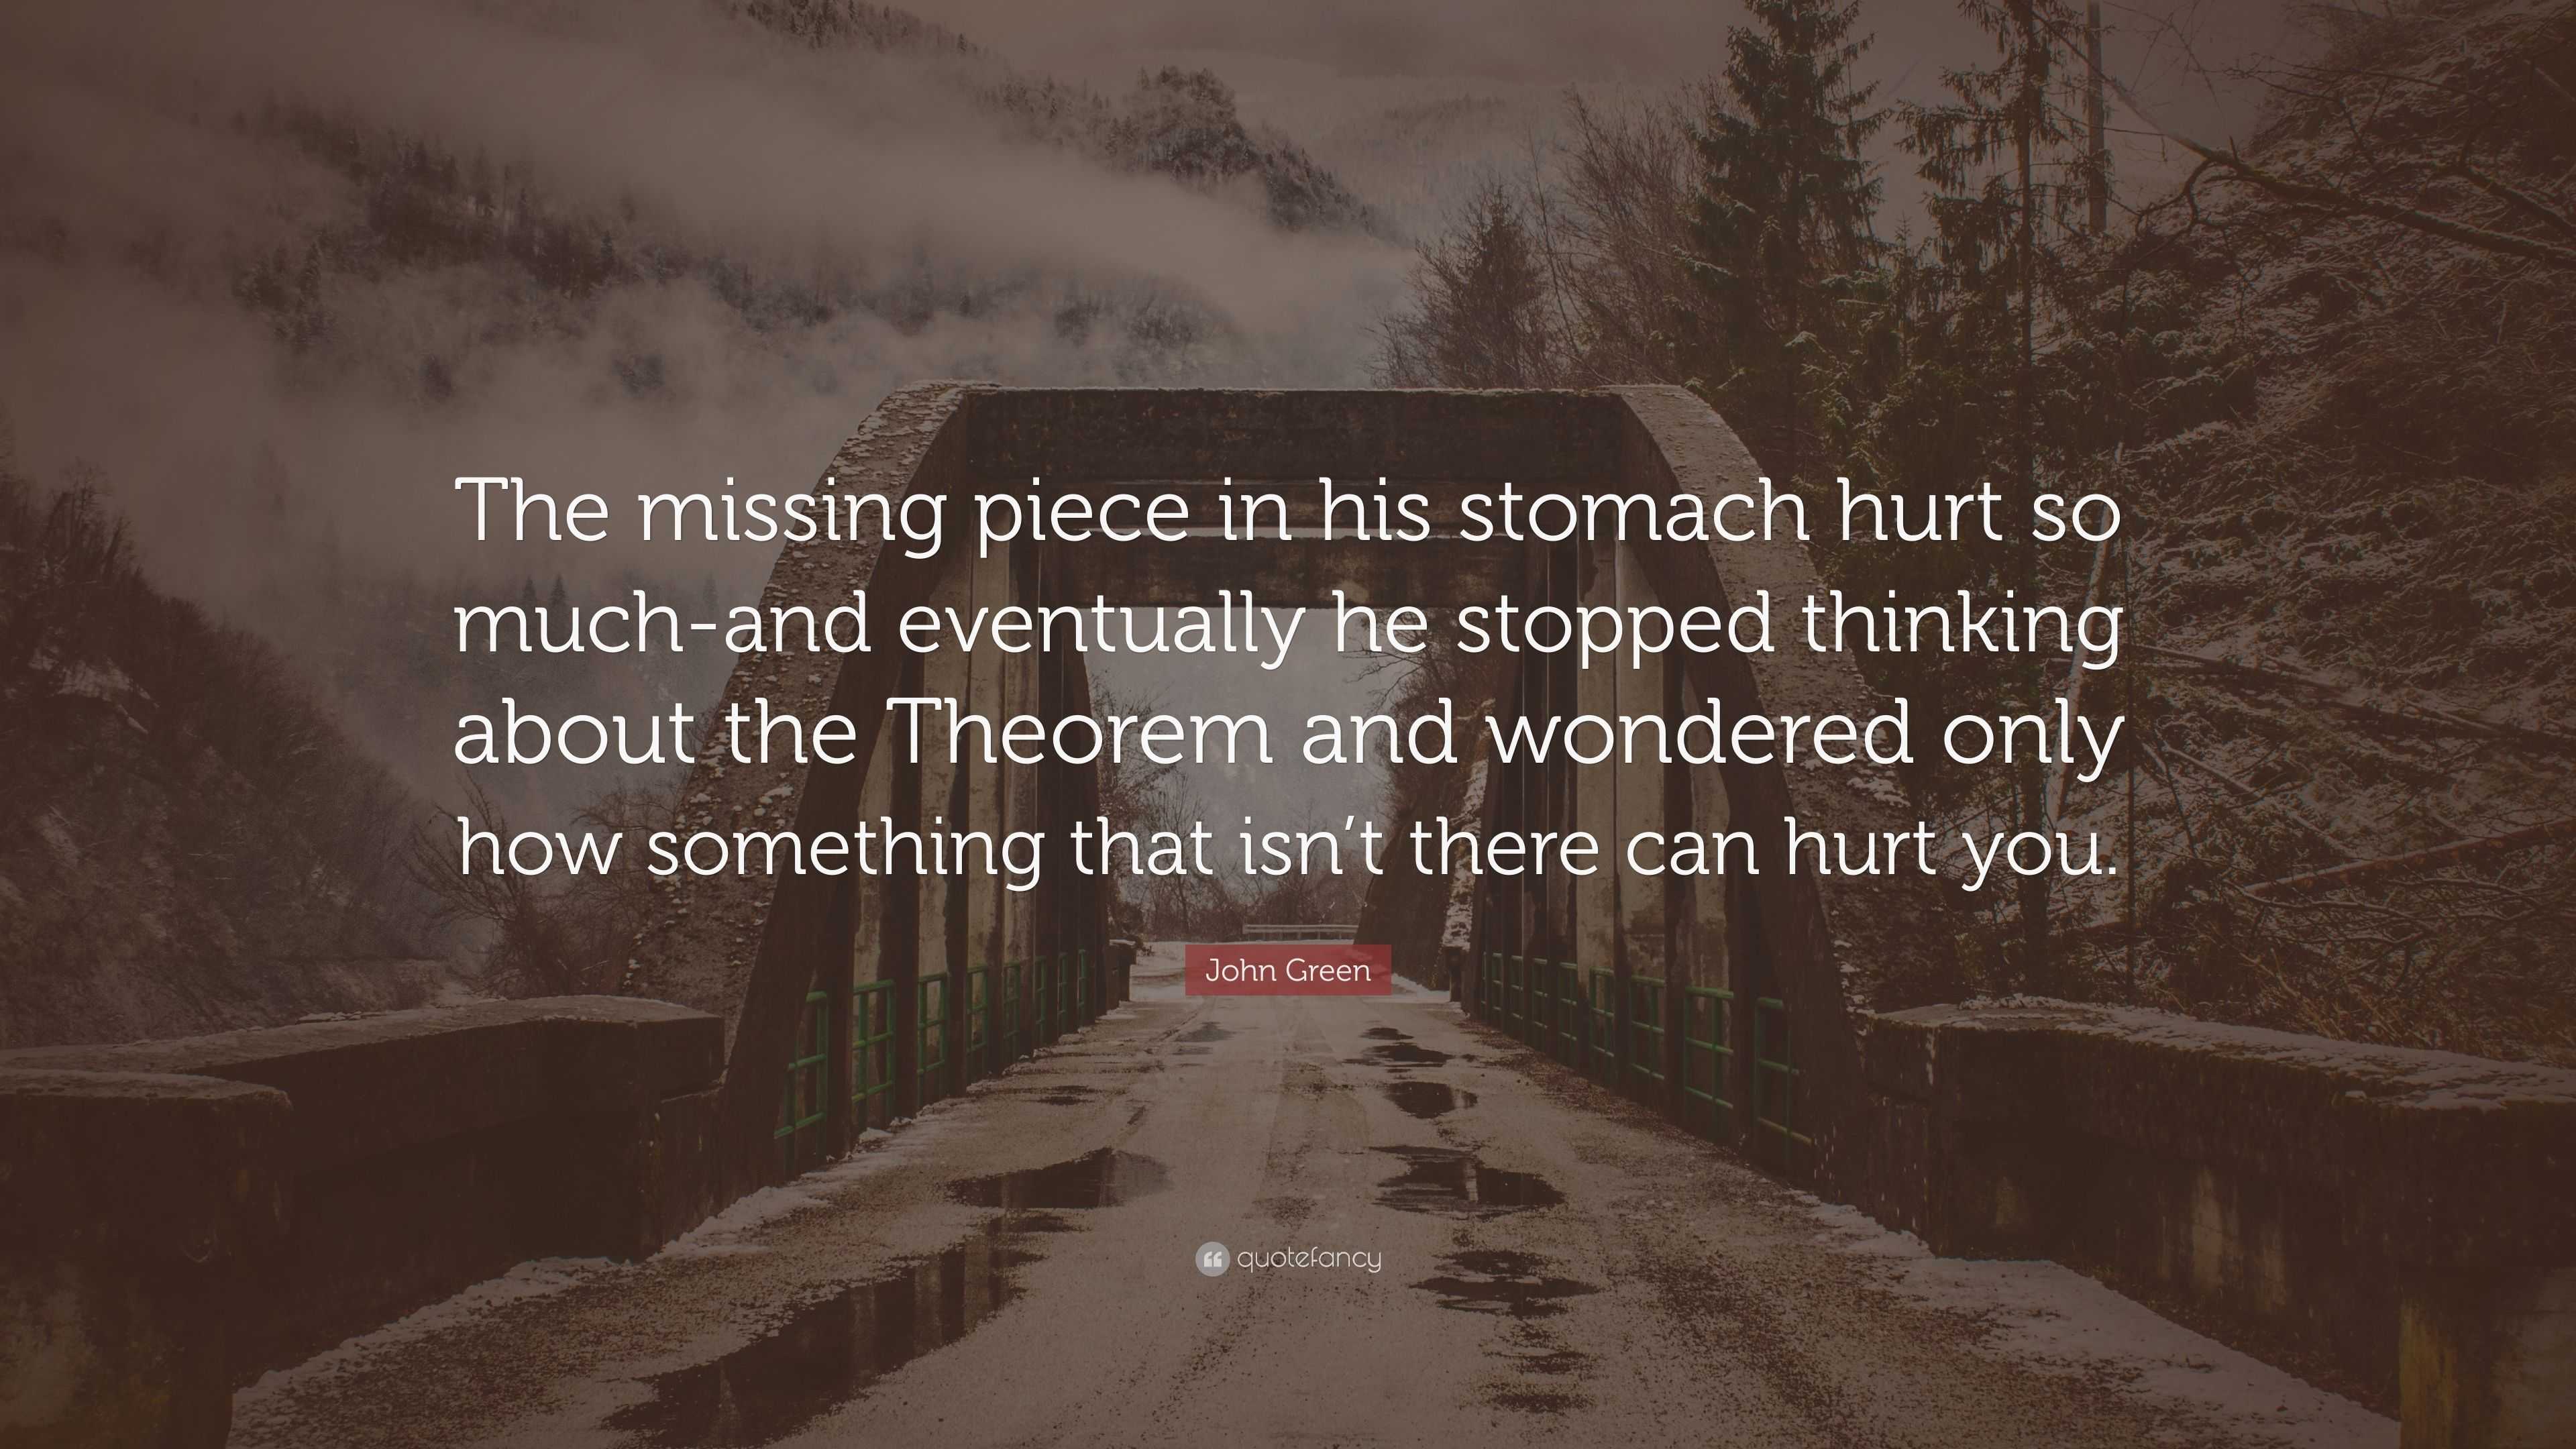 John Green Quote: "The missing piece in his stomach hurt ...